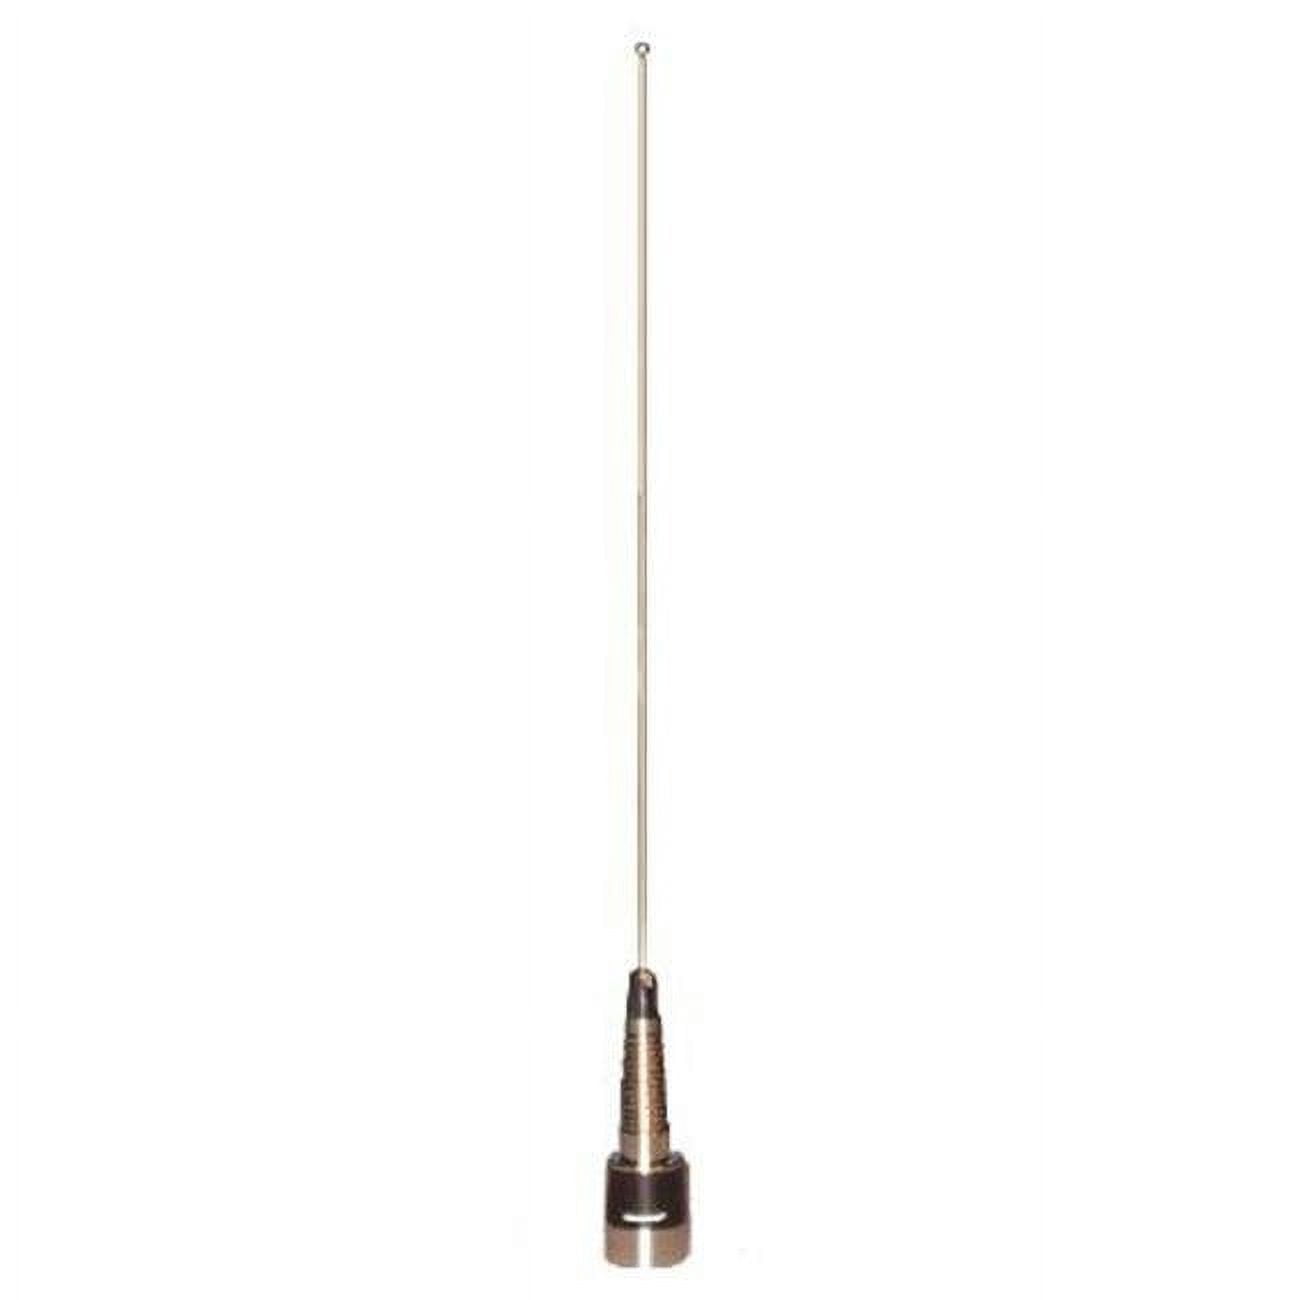 Picture of PCTEL-Maxrad MWV1365S 136 - 174 MHz Unity Gain Wideband Antenna with Spring